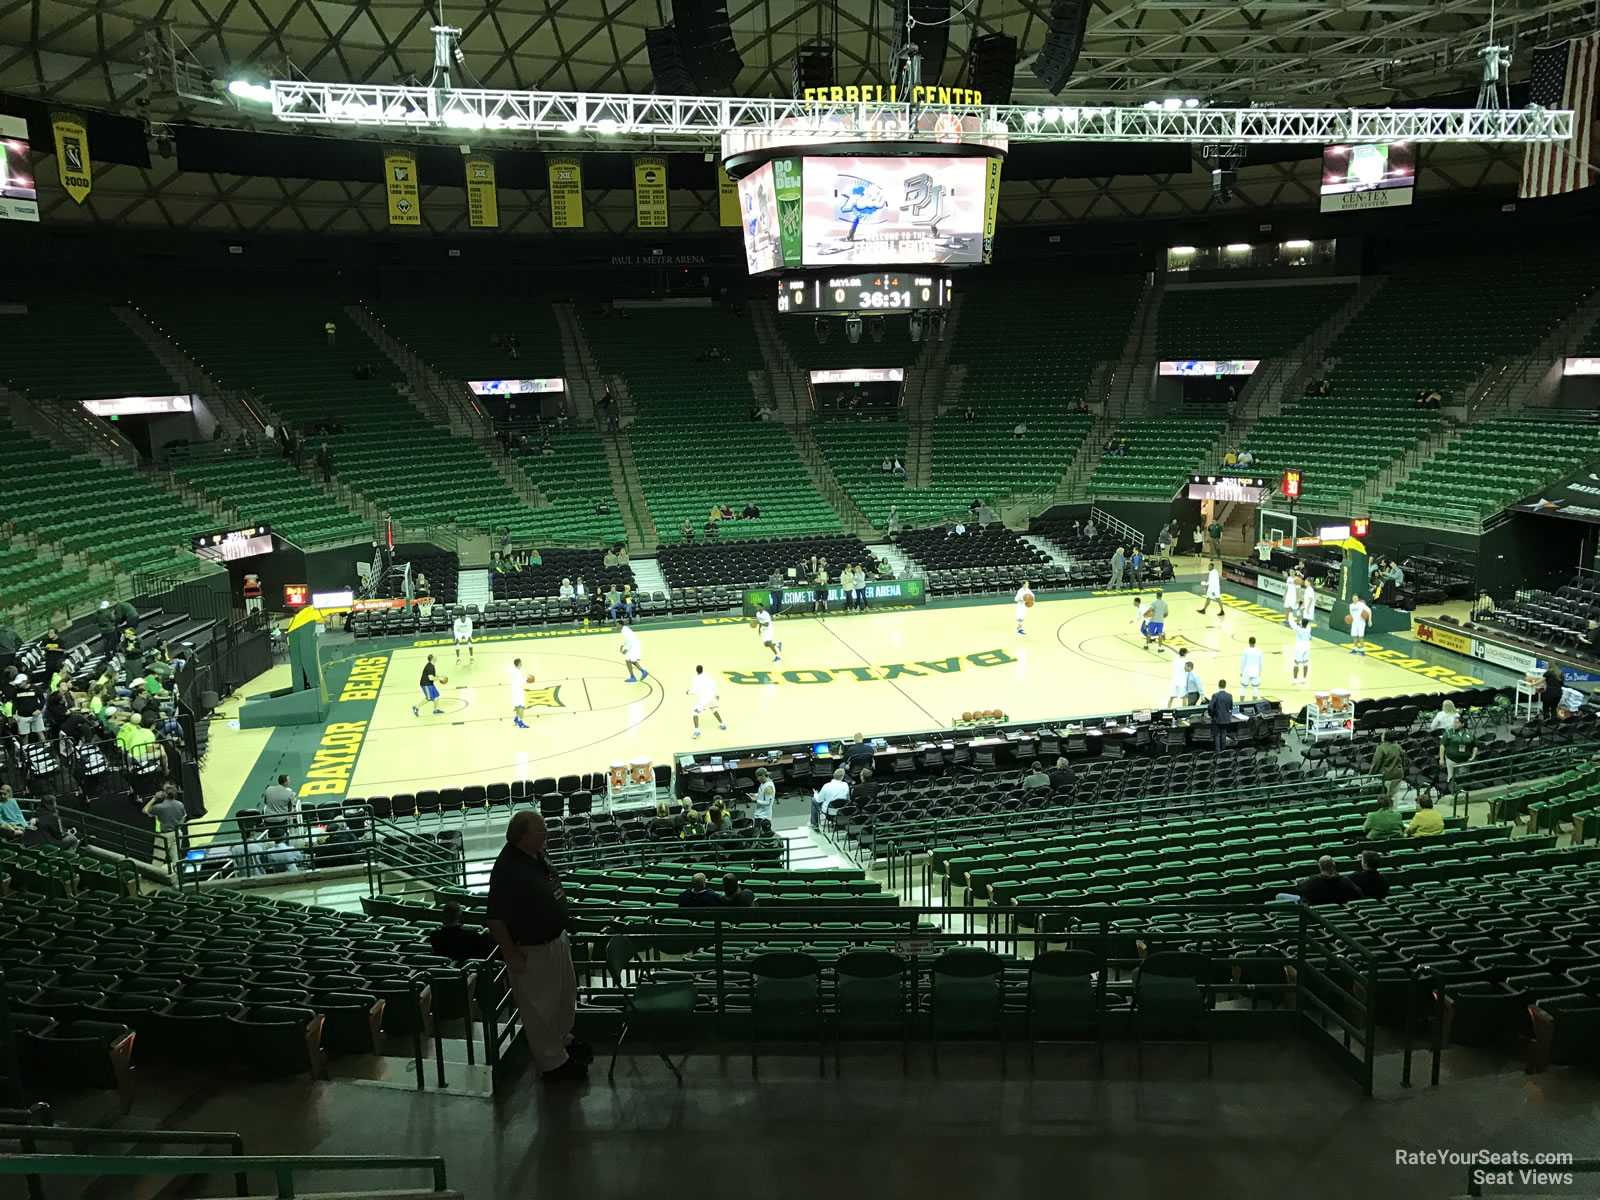 section 114, row 24 seat view  - ferrell center